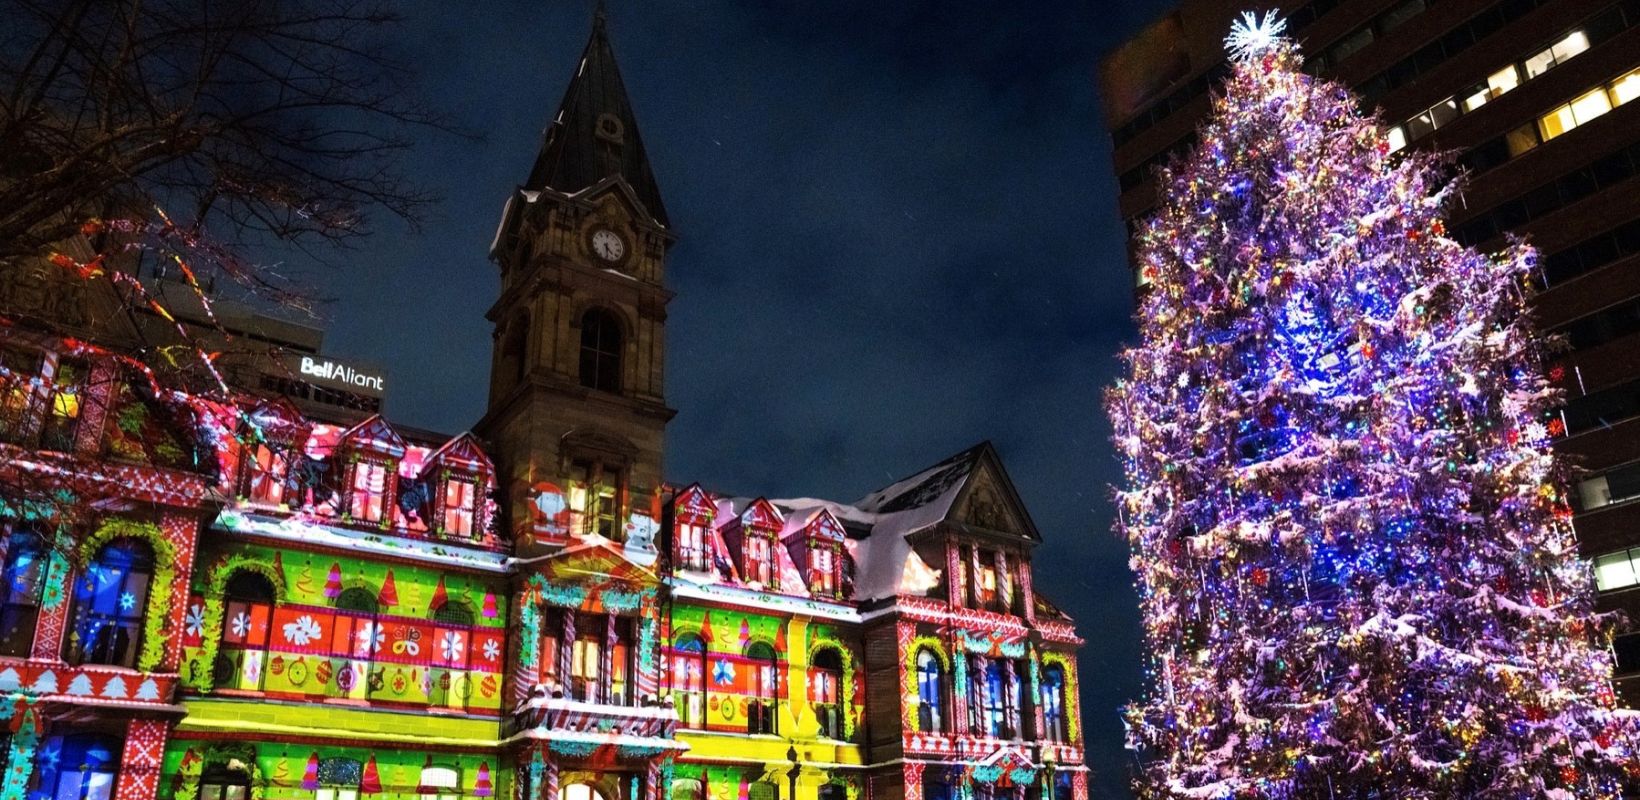 2021 Halifax Christmas Tree and projection show in Grand Parade